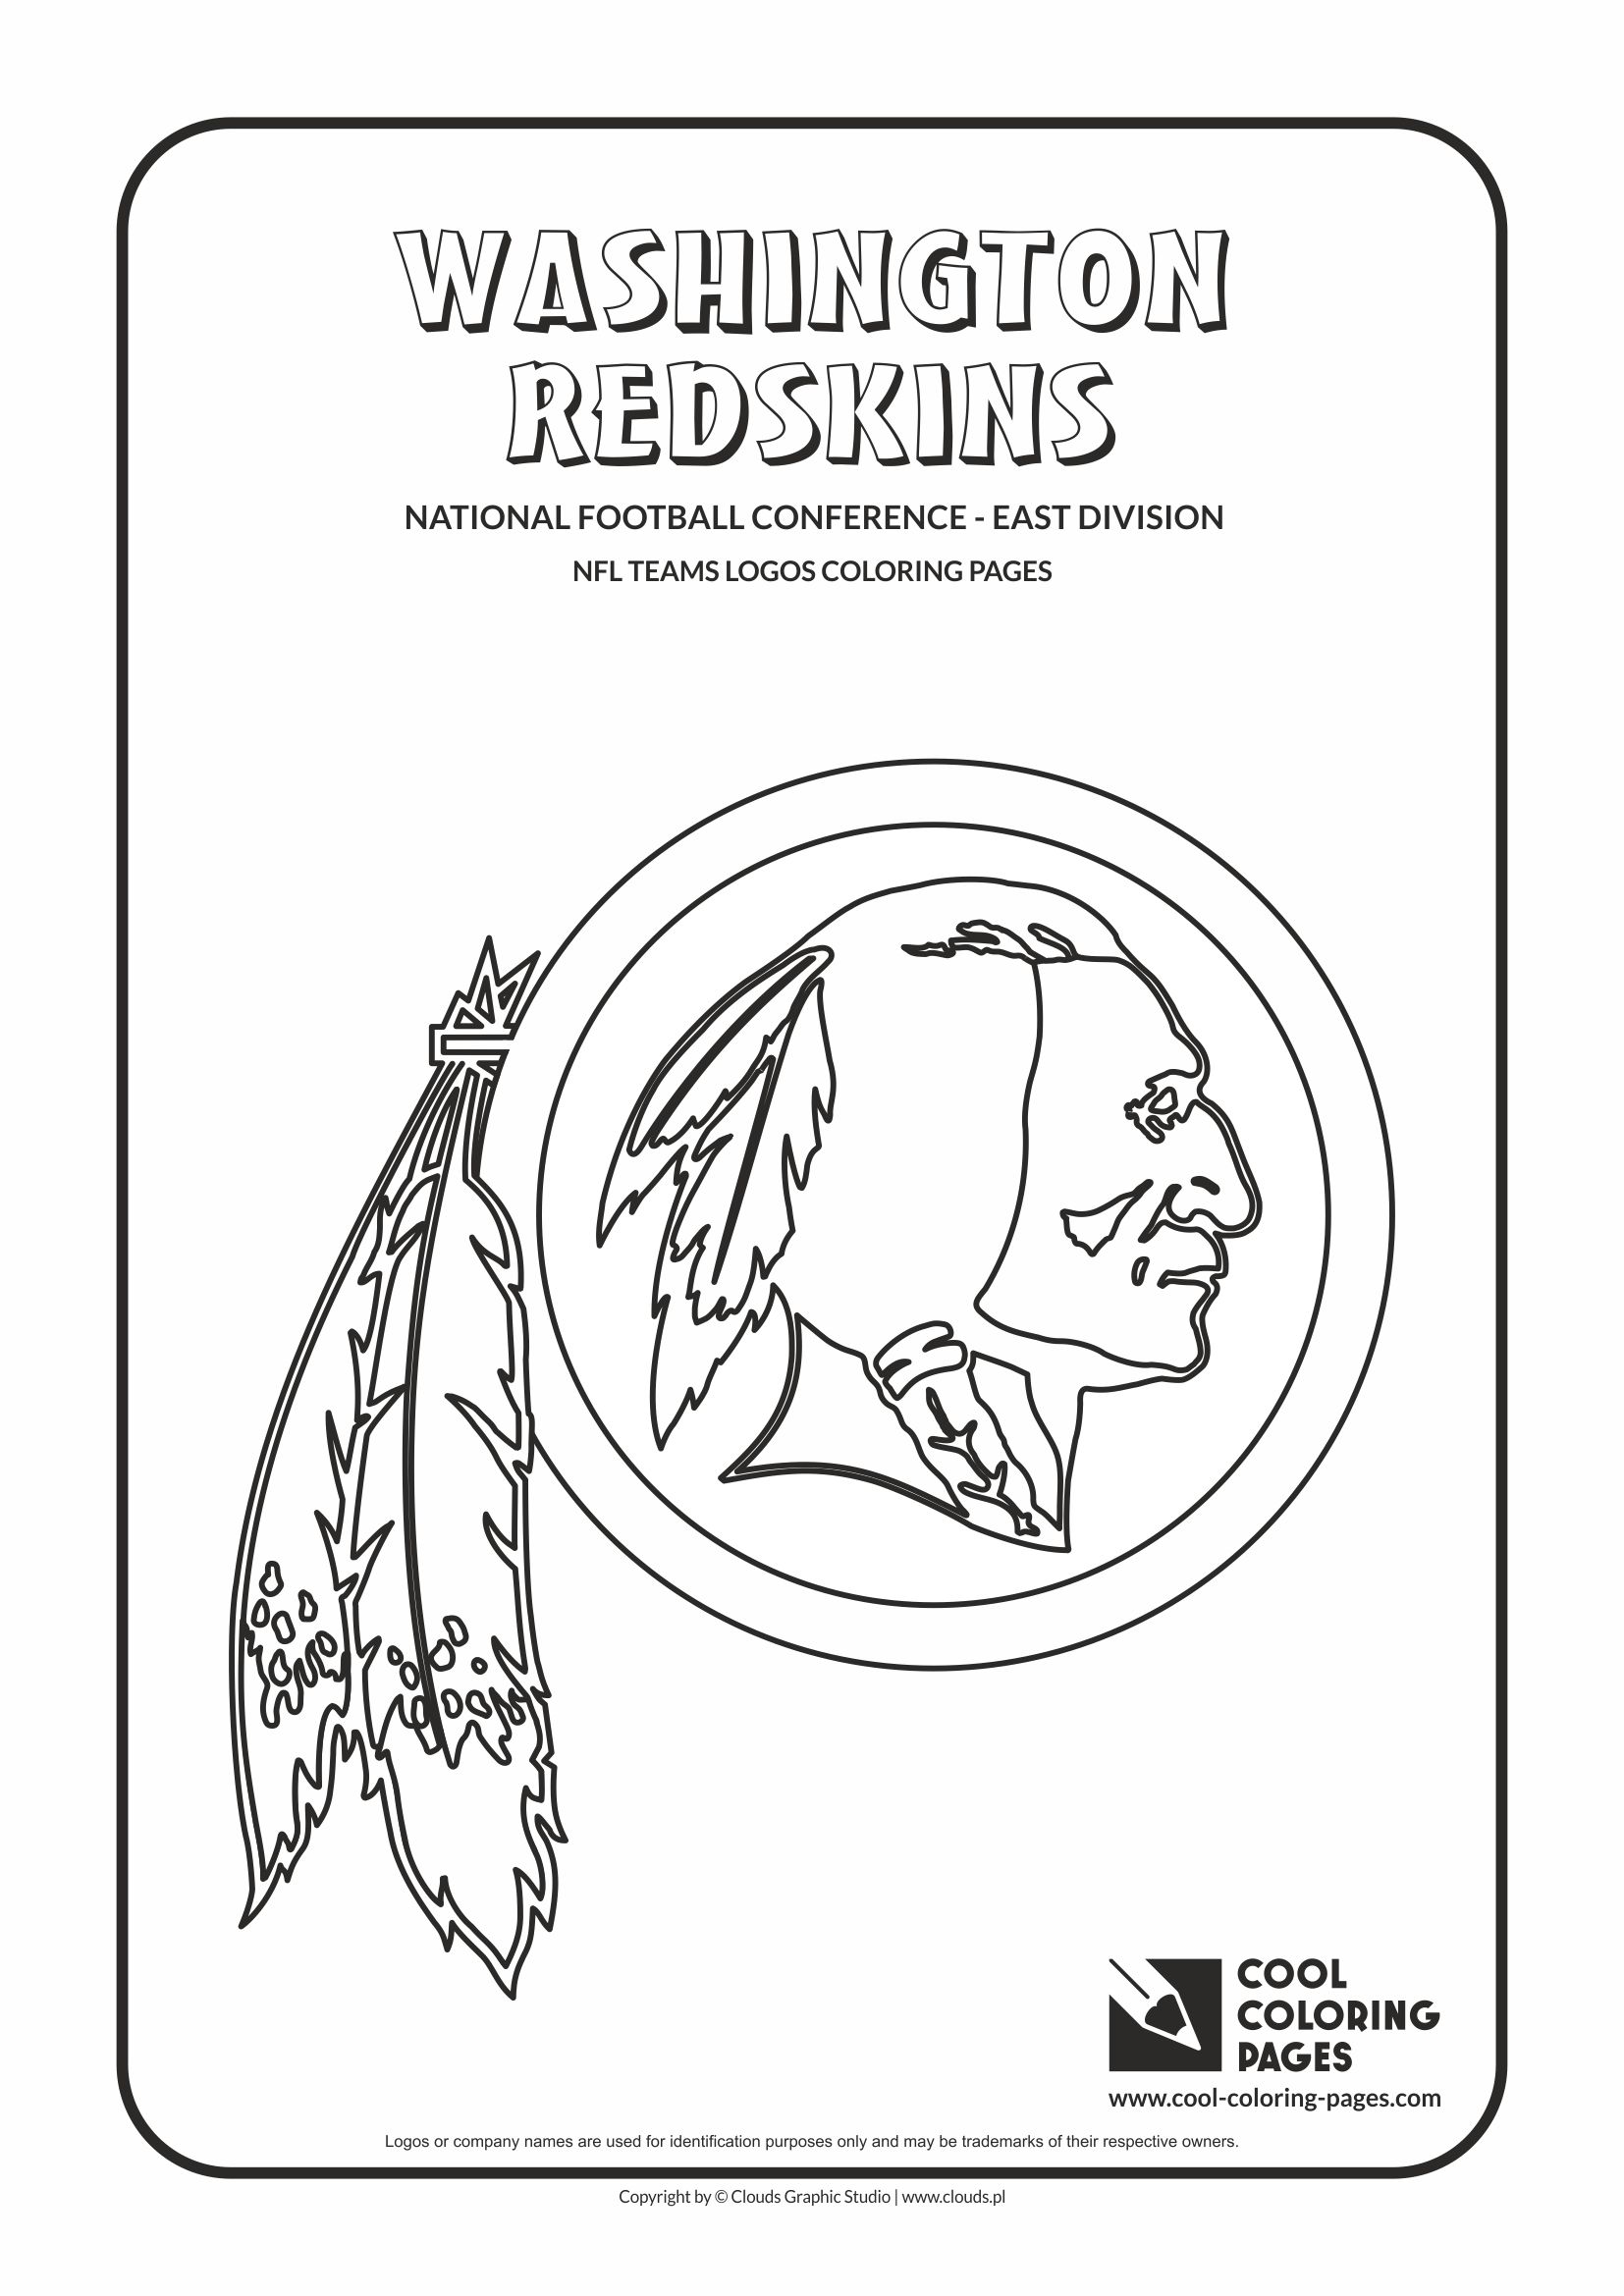 Cool Coloring Pages - NFL American Football Clubs Logos - National Football Conference - East Division / Washington Redskins logo / Coloring page with Washington Redskins logo